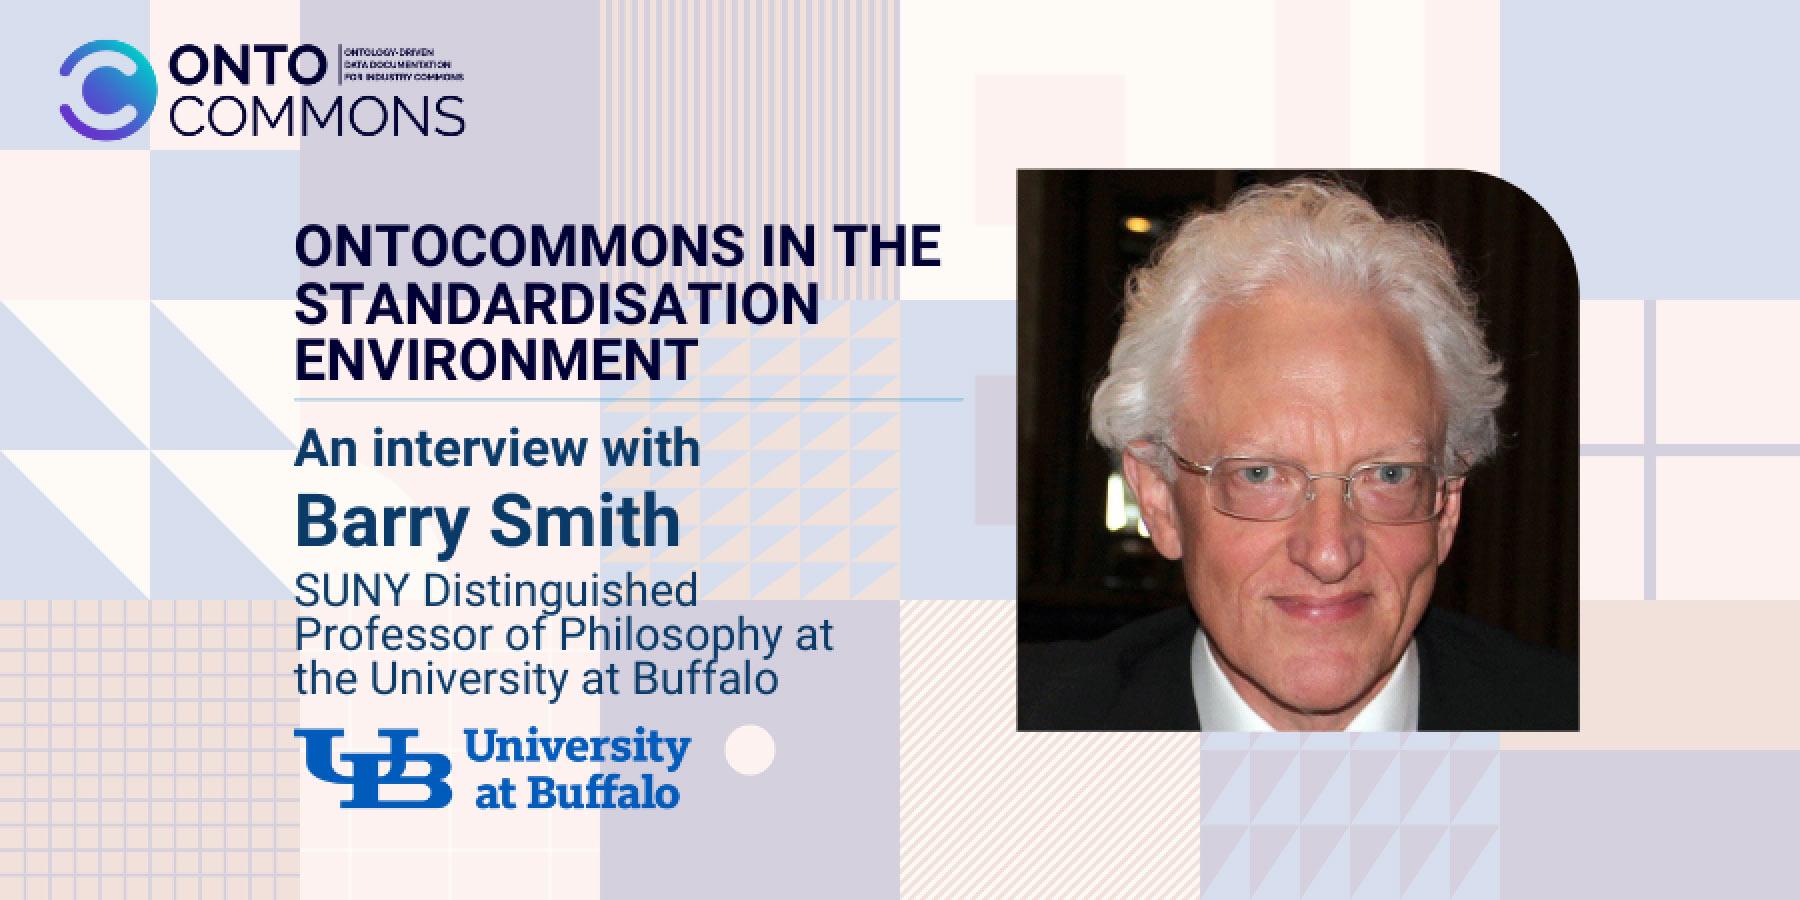 OntoCommons in the standardisation environment: an interview with Barry Smith